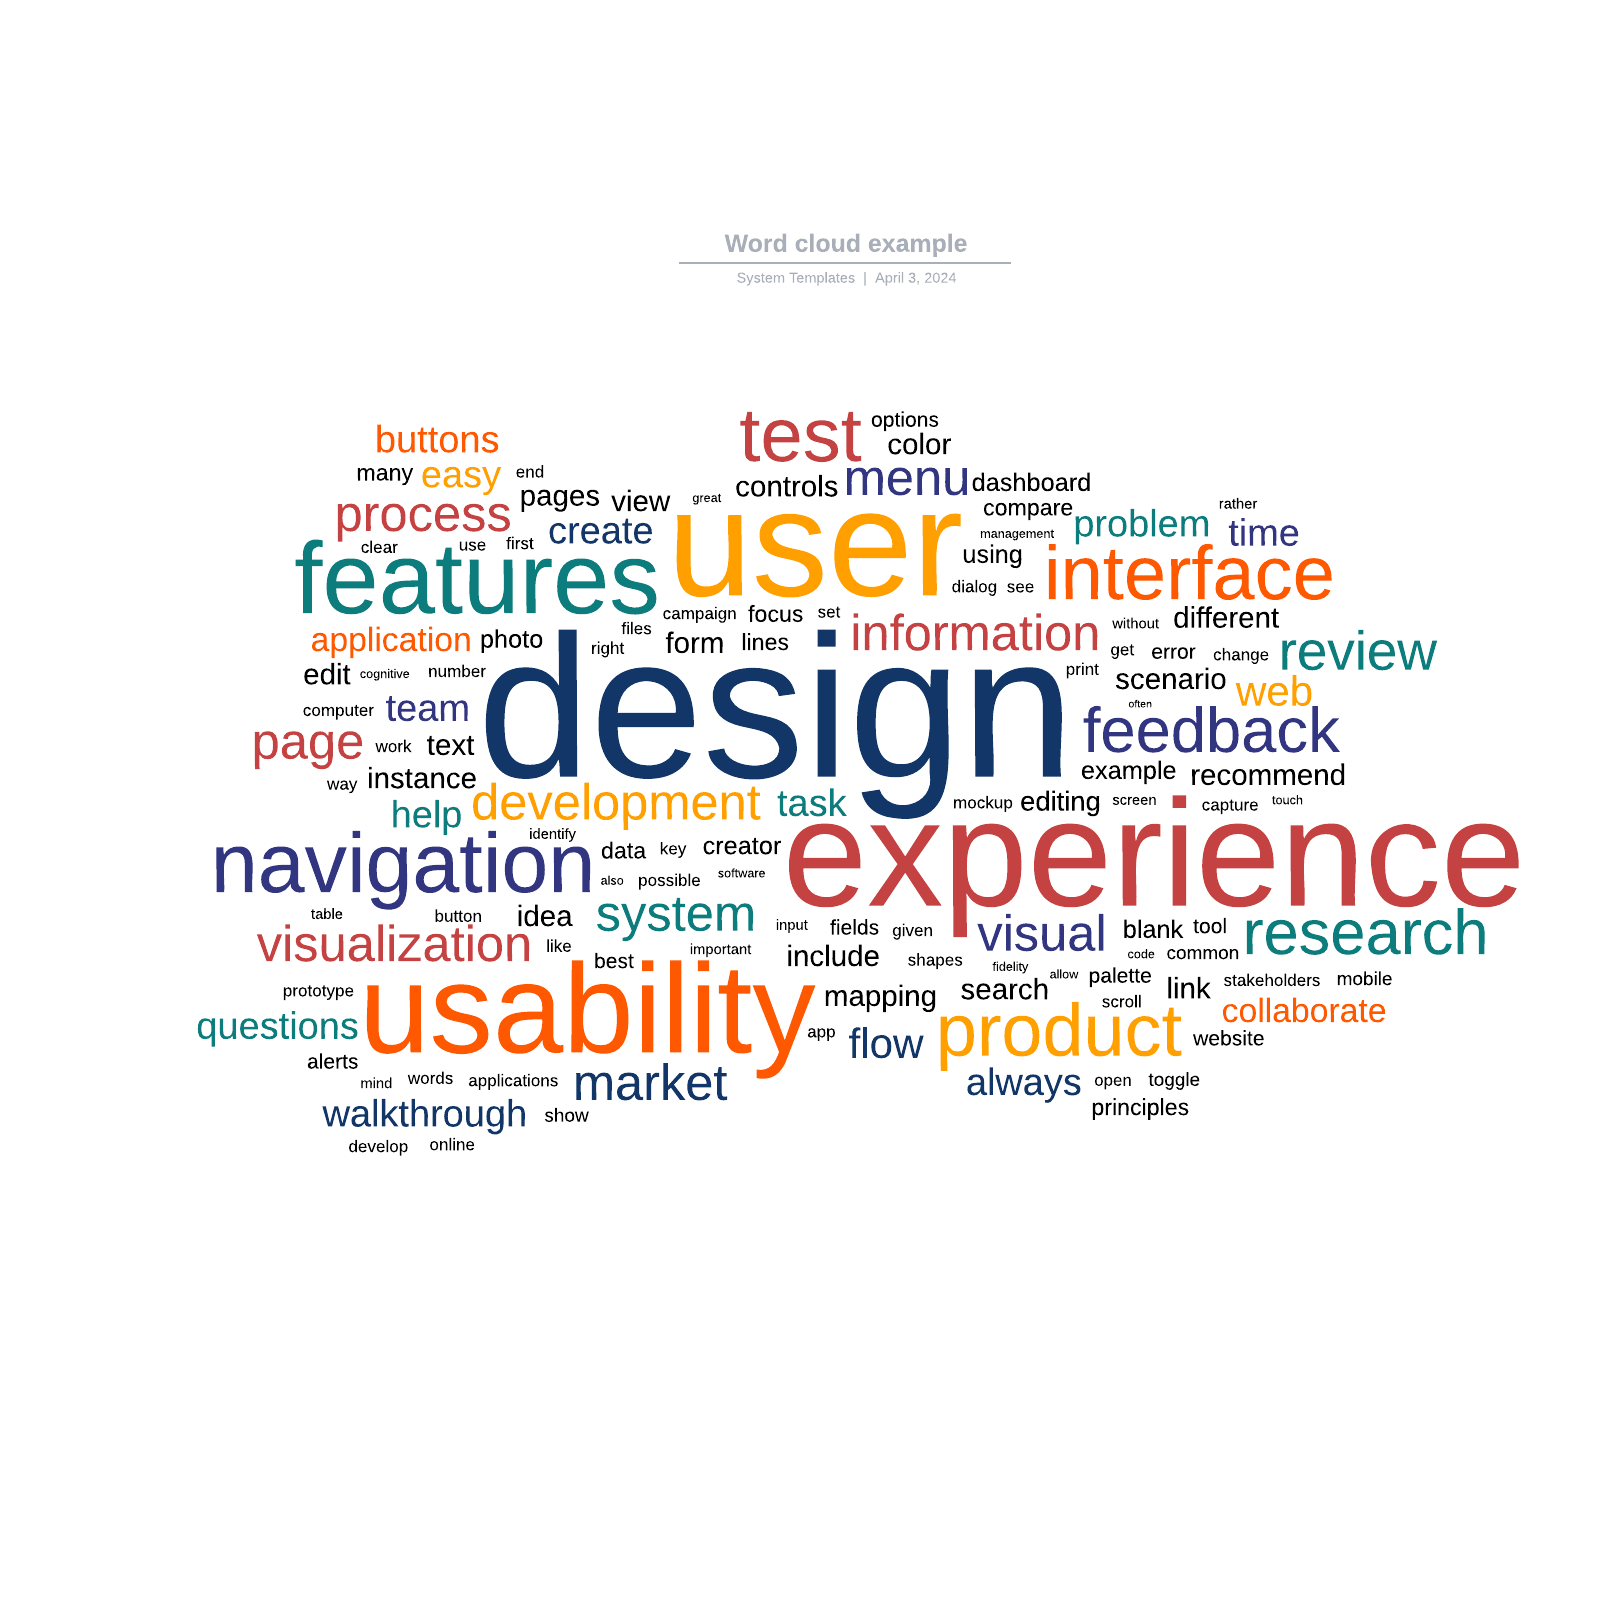 Word cloud example example